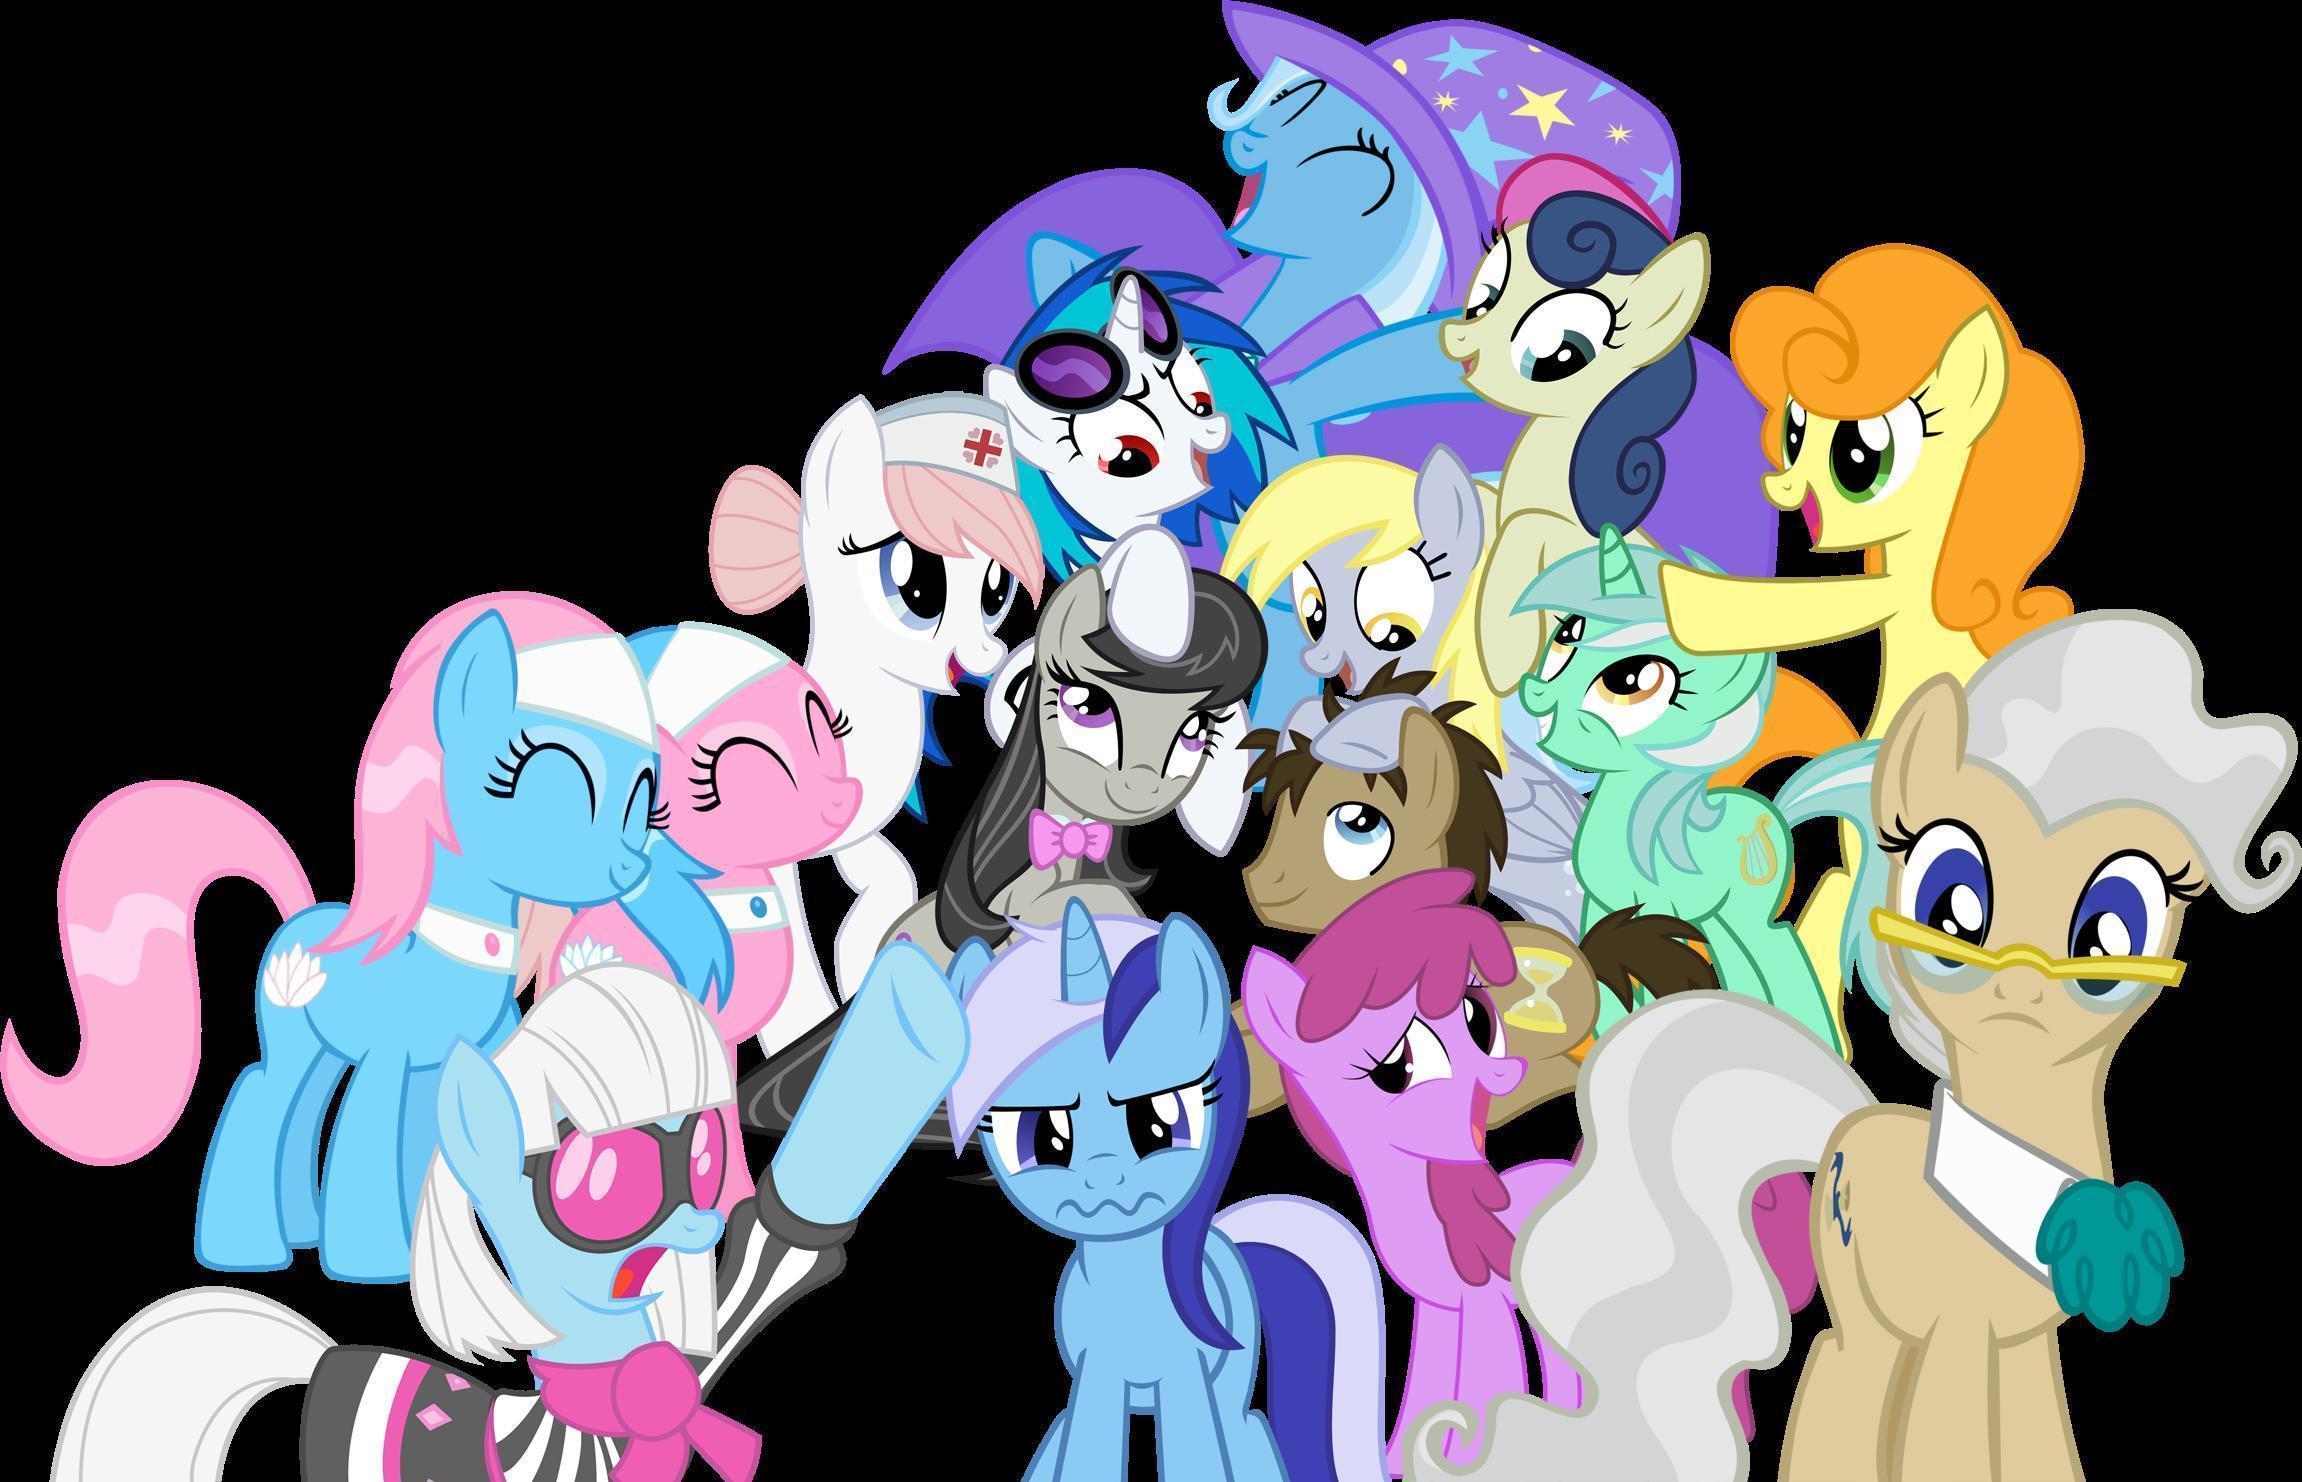 Is Your Favorite Pony A Background Minor Pony? Poll Results